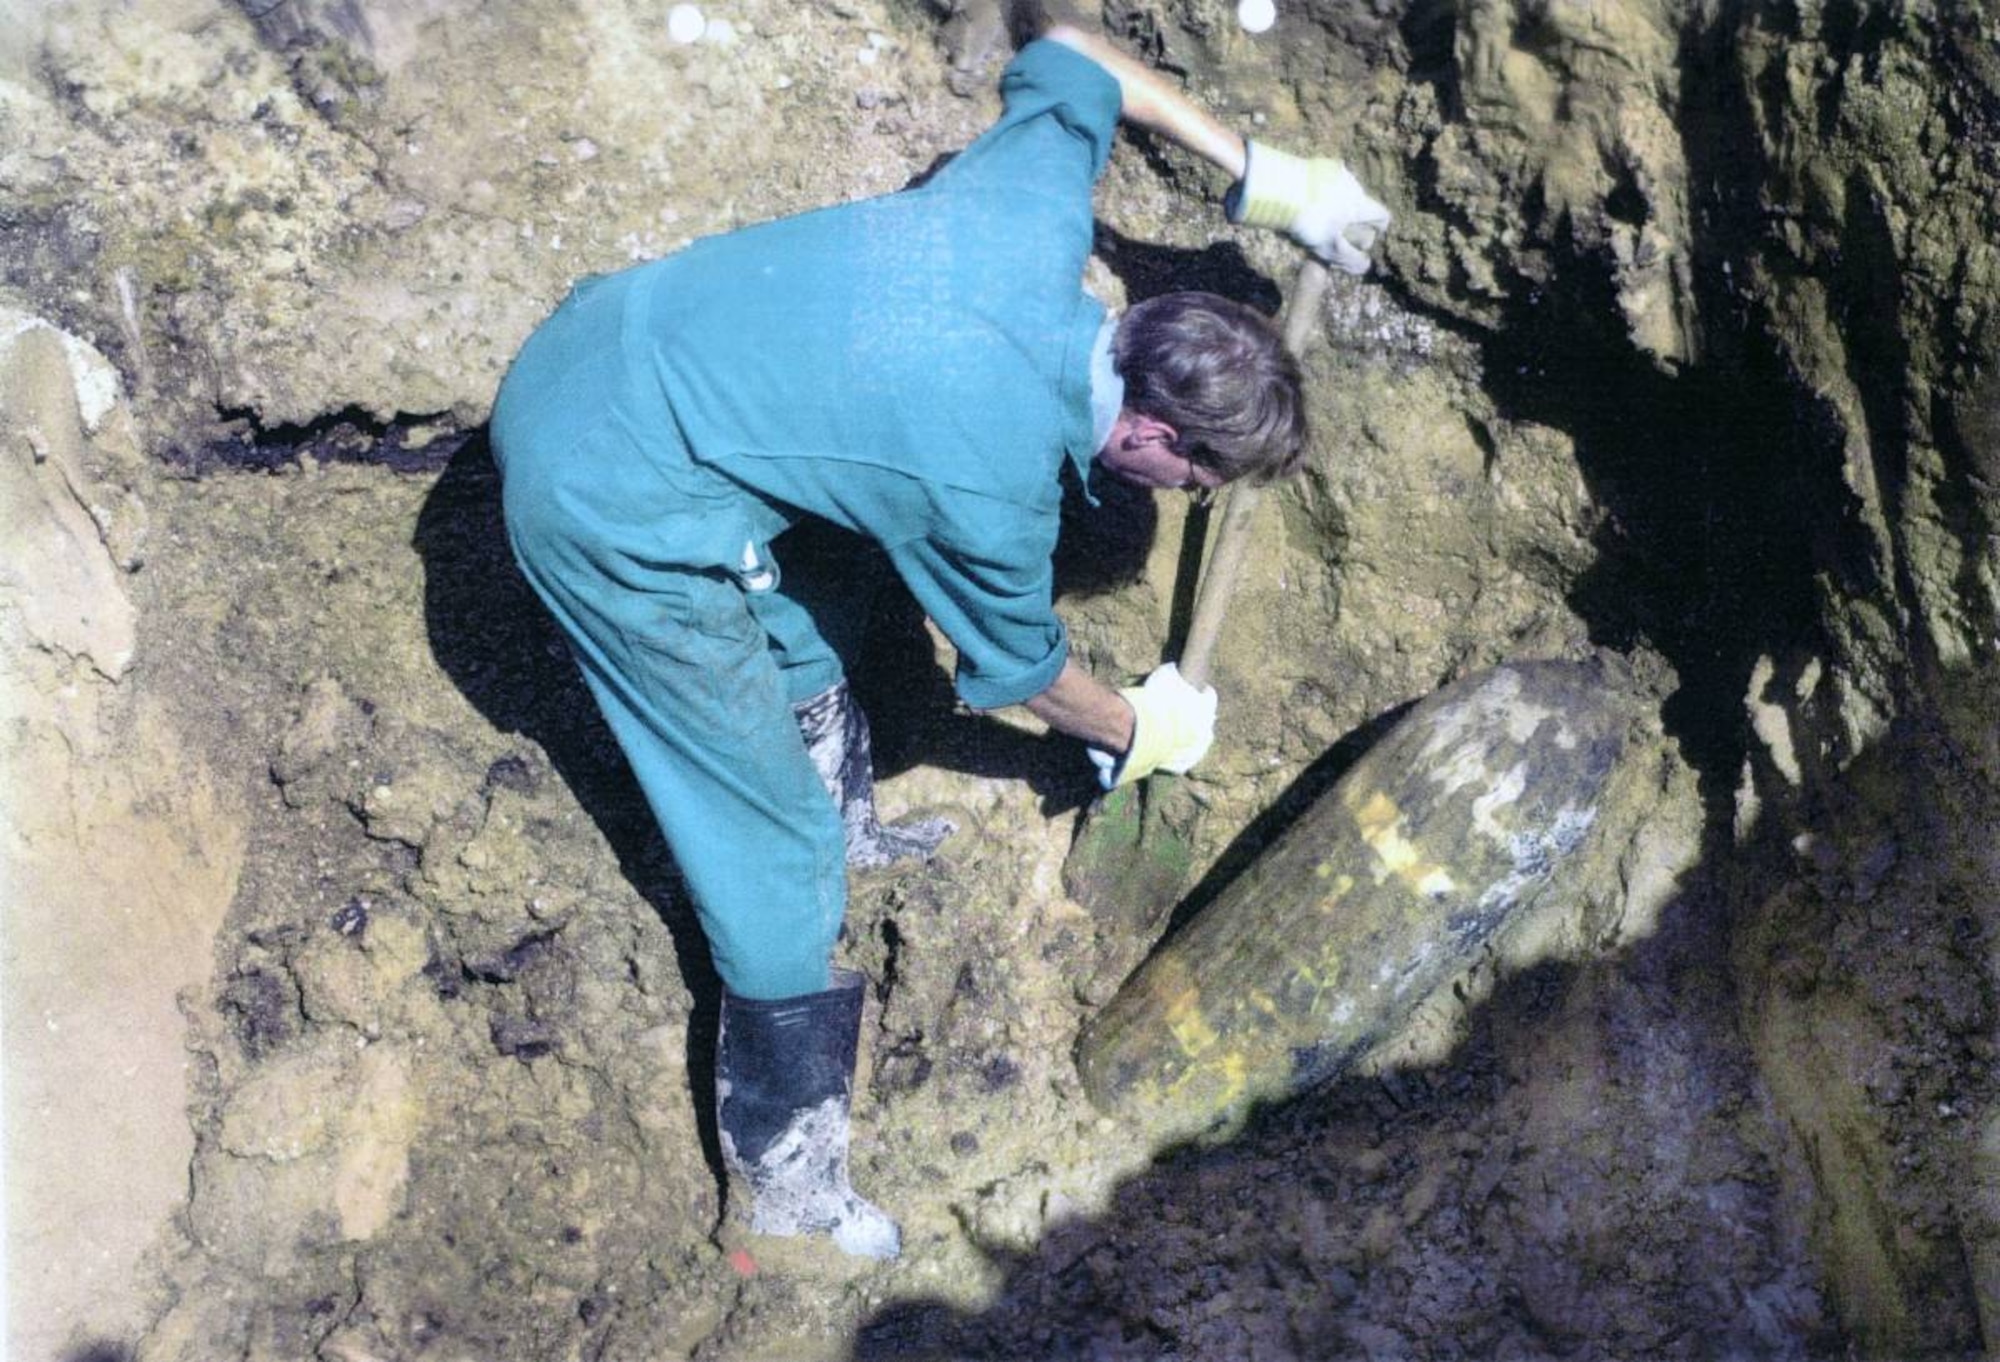 An unexploded ordnance disposal expert excavates a 500-pound bomb dropped on Germany during World War II. (Courtesy photo)